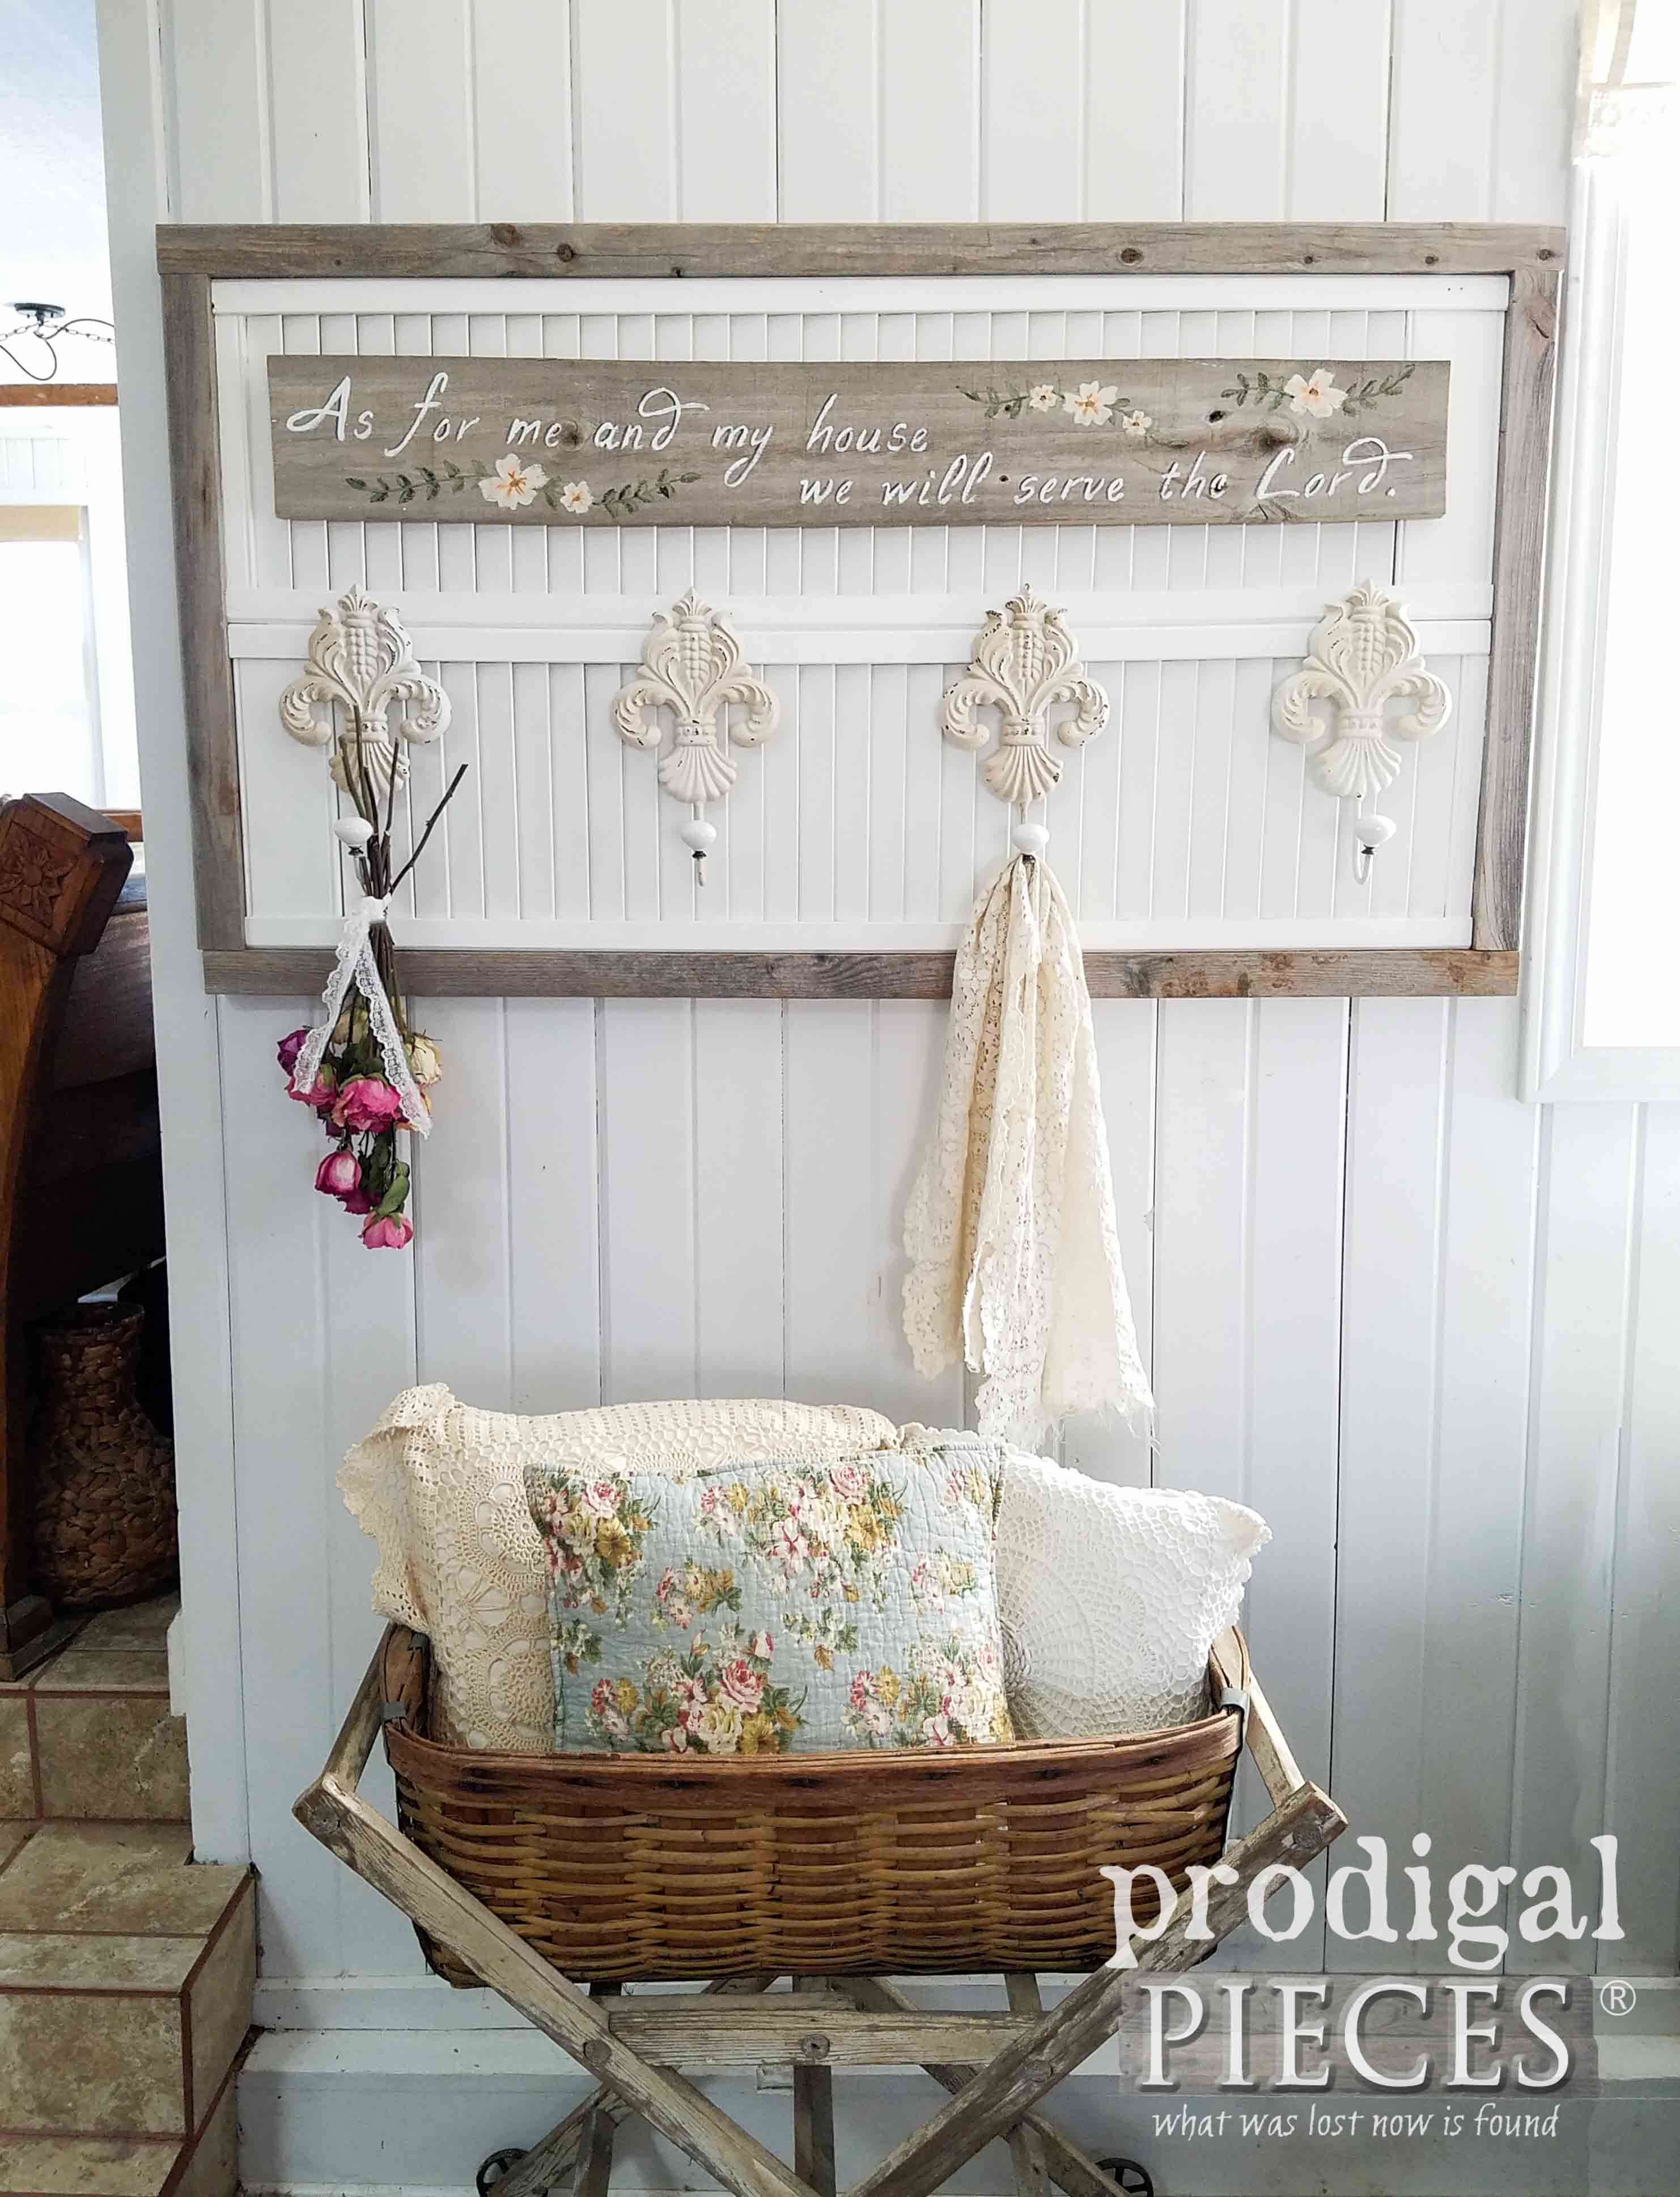 DIY Repurposed Louver Doors Made into Beautiful Reclaimed Wall Art with Coat Rack by Larissa of Prodigal Pieces | prodigalpieces.com